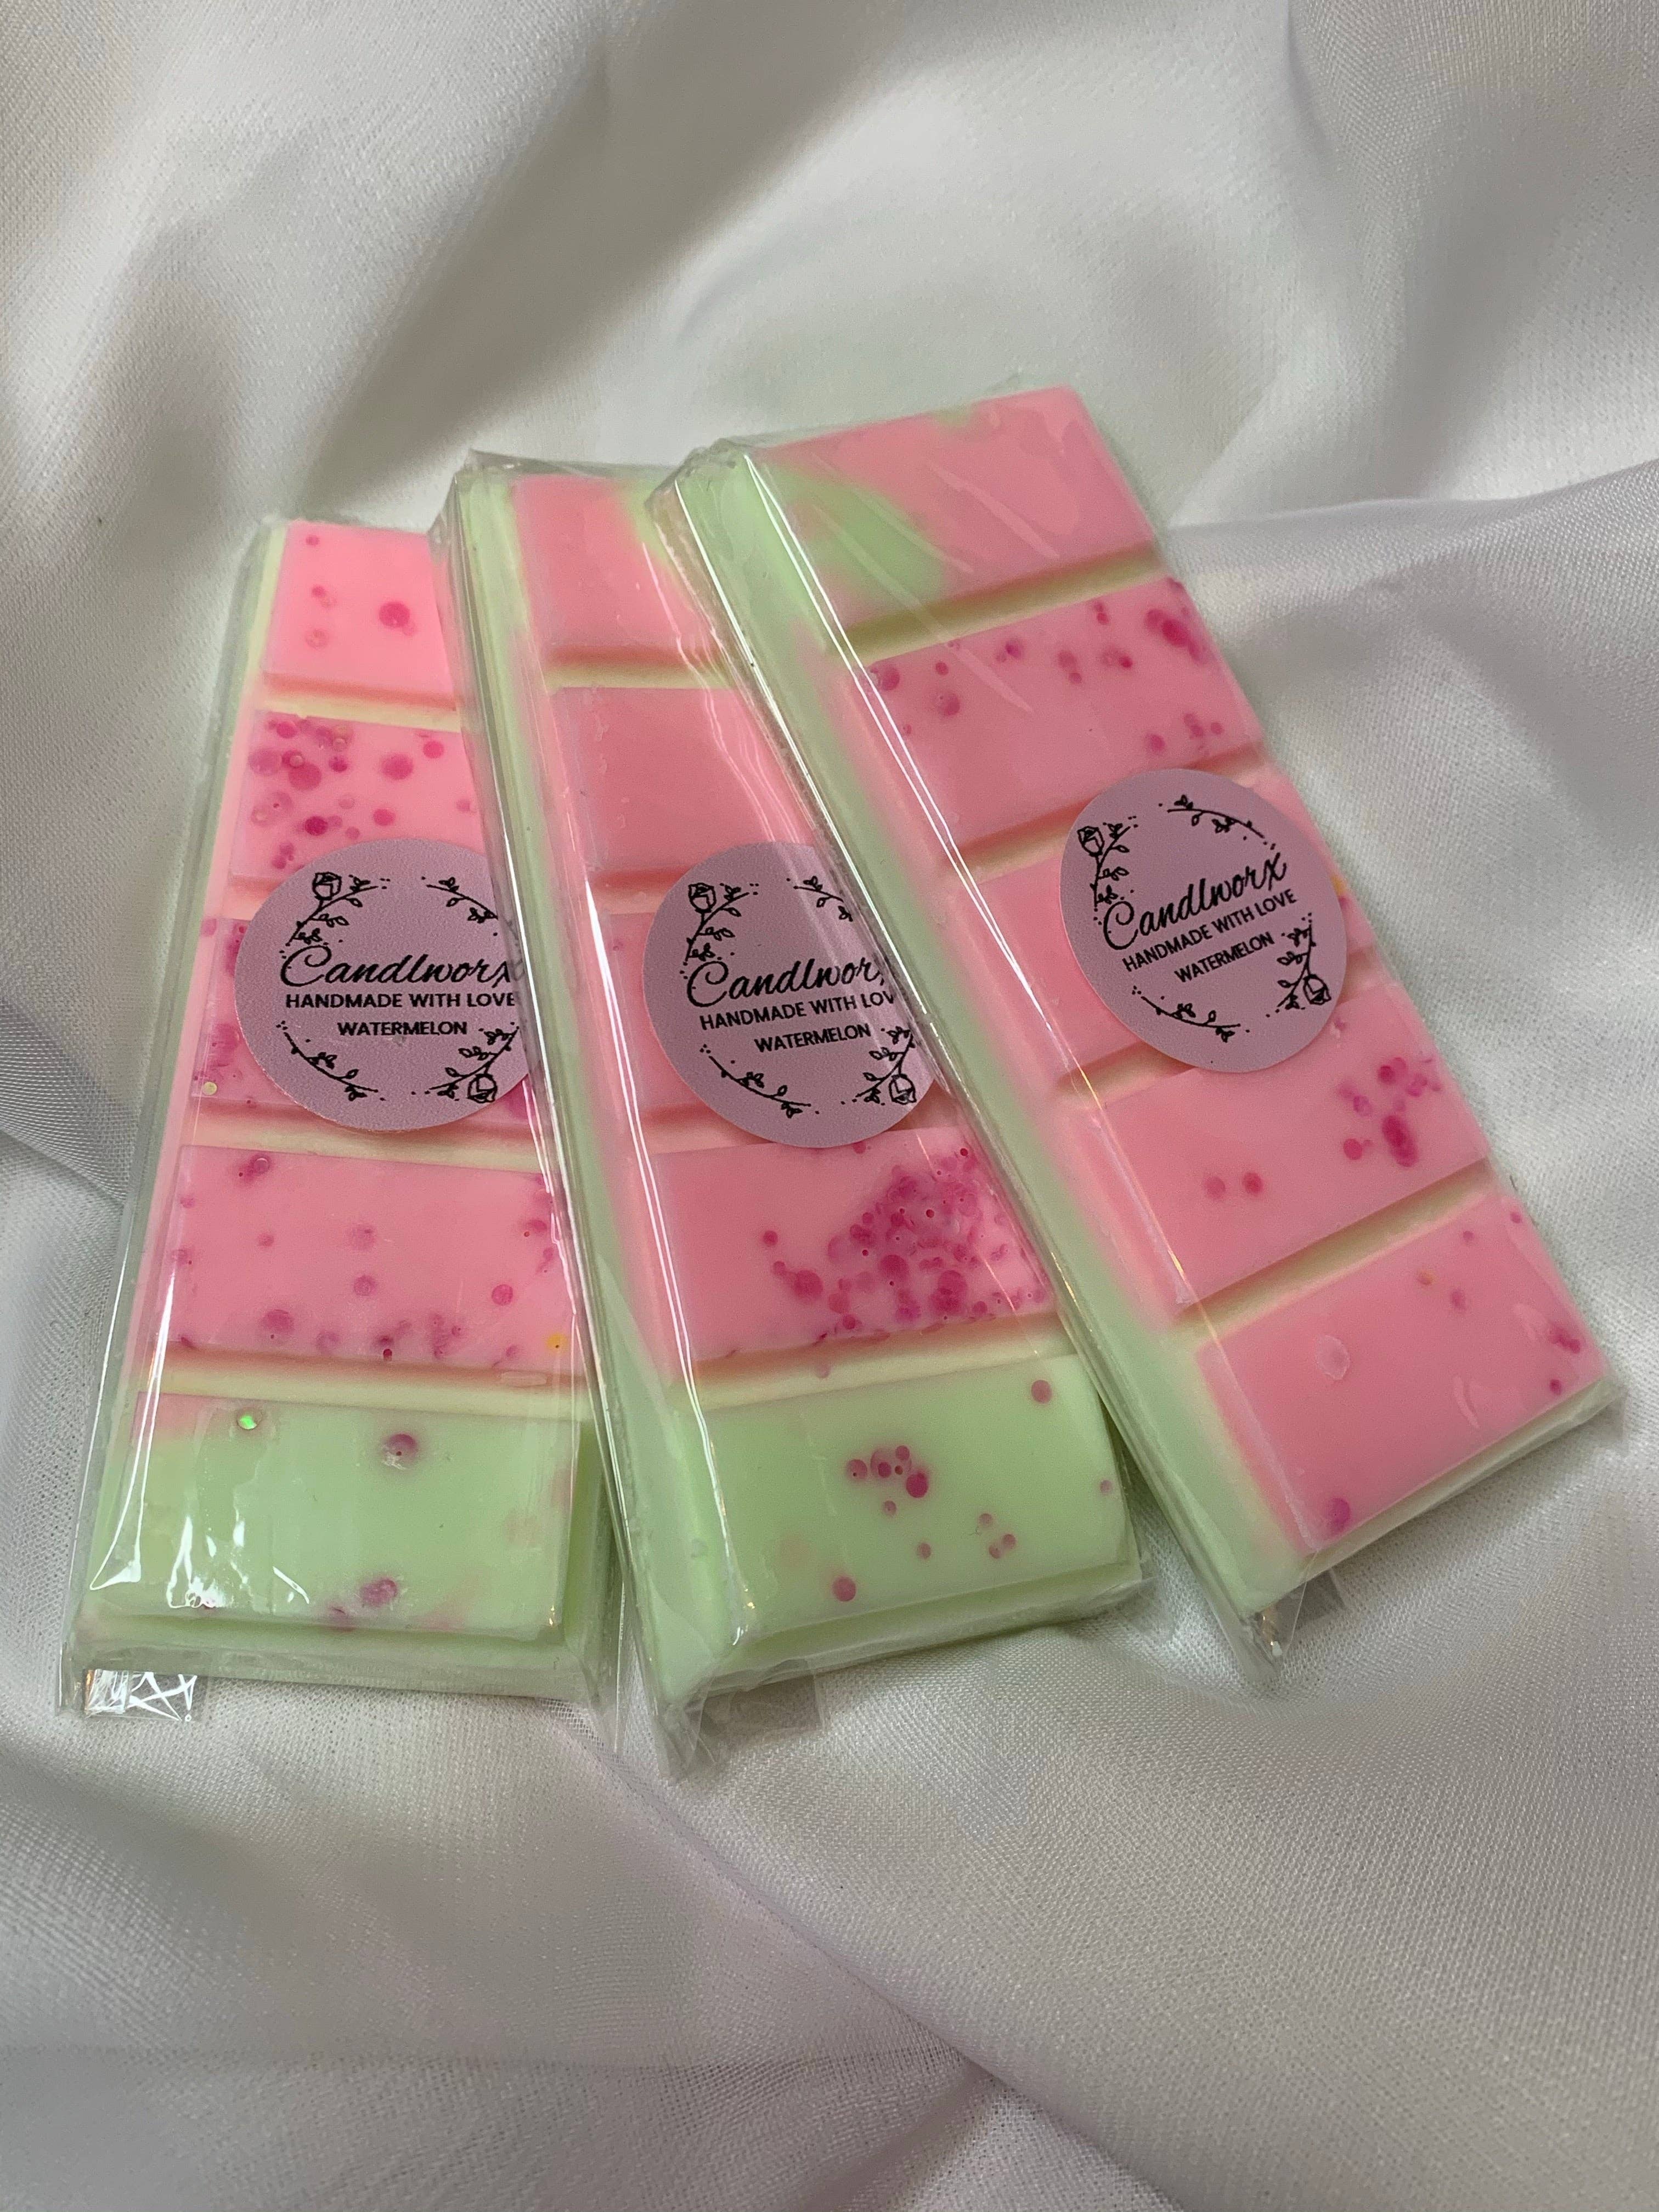 ICRAFT FREE UK shipping Vanilla Lime Scented Soy Wax Melts Glitter Snap Bars & Hearts